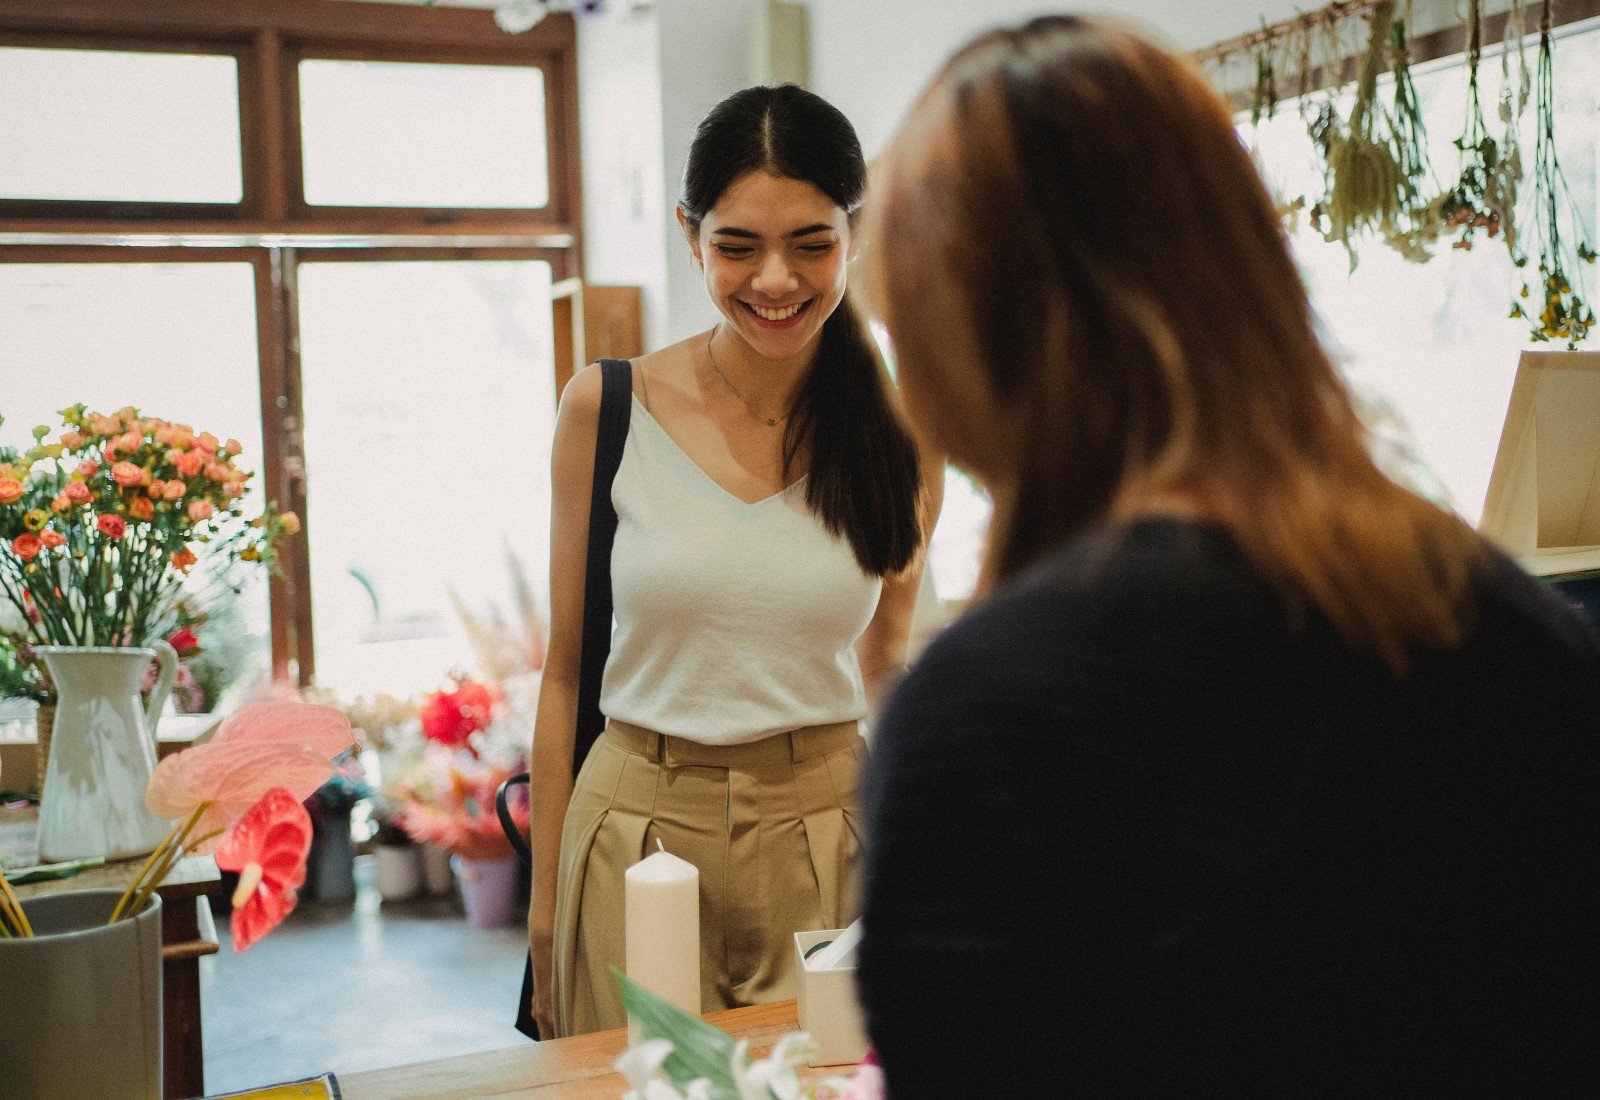 4 Ways Businesses Can Build Customer Loyalty (and Why it Matters)